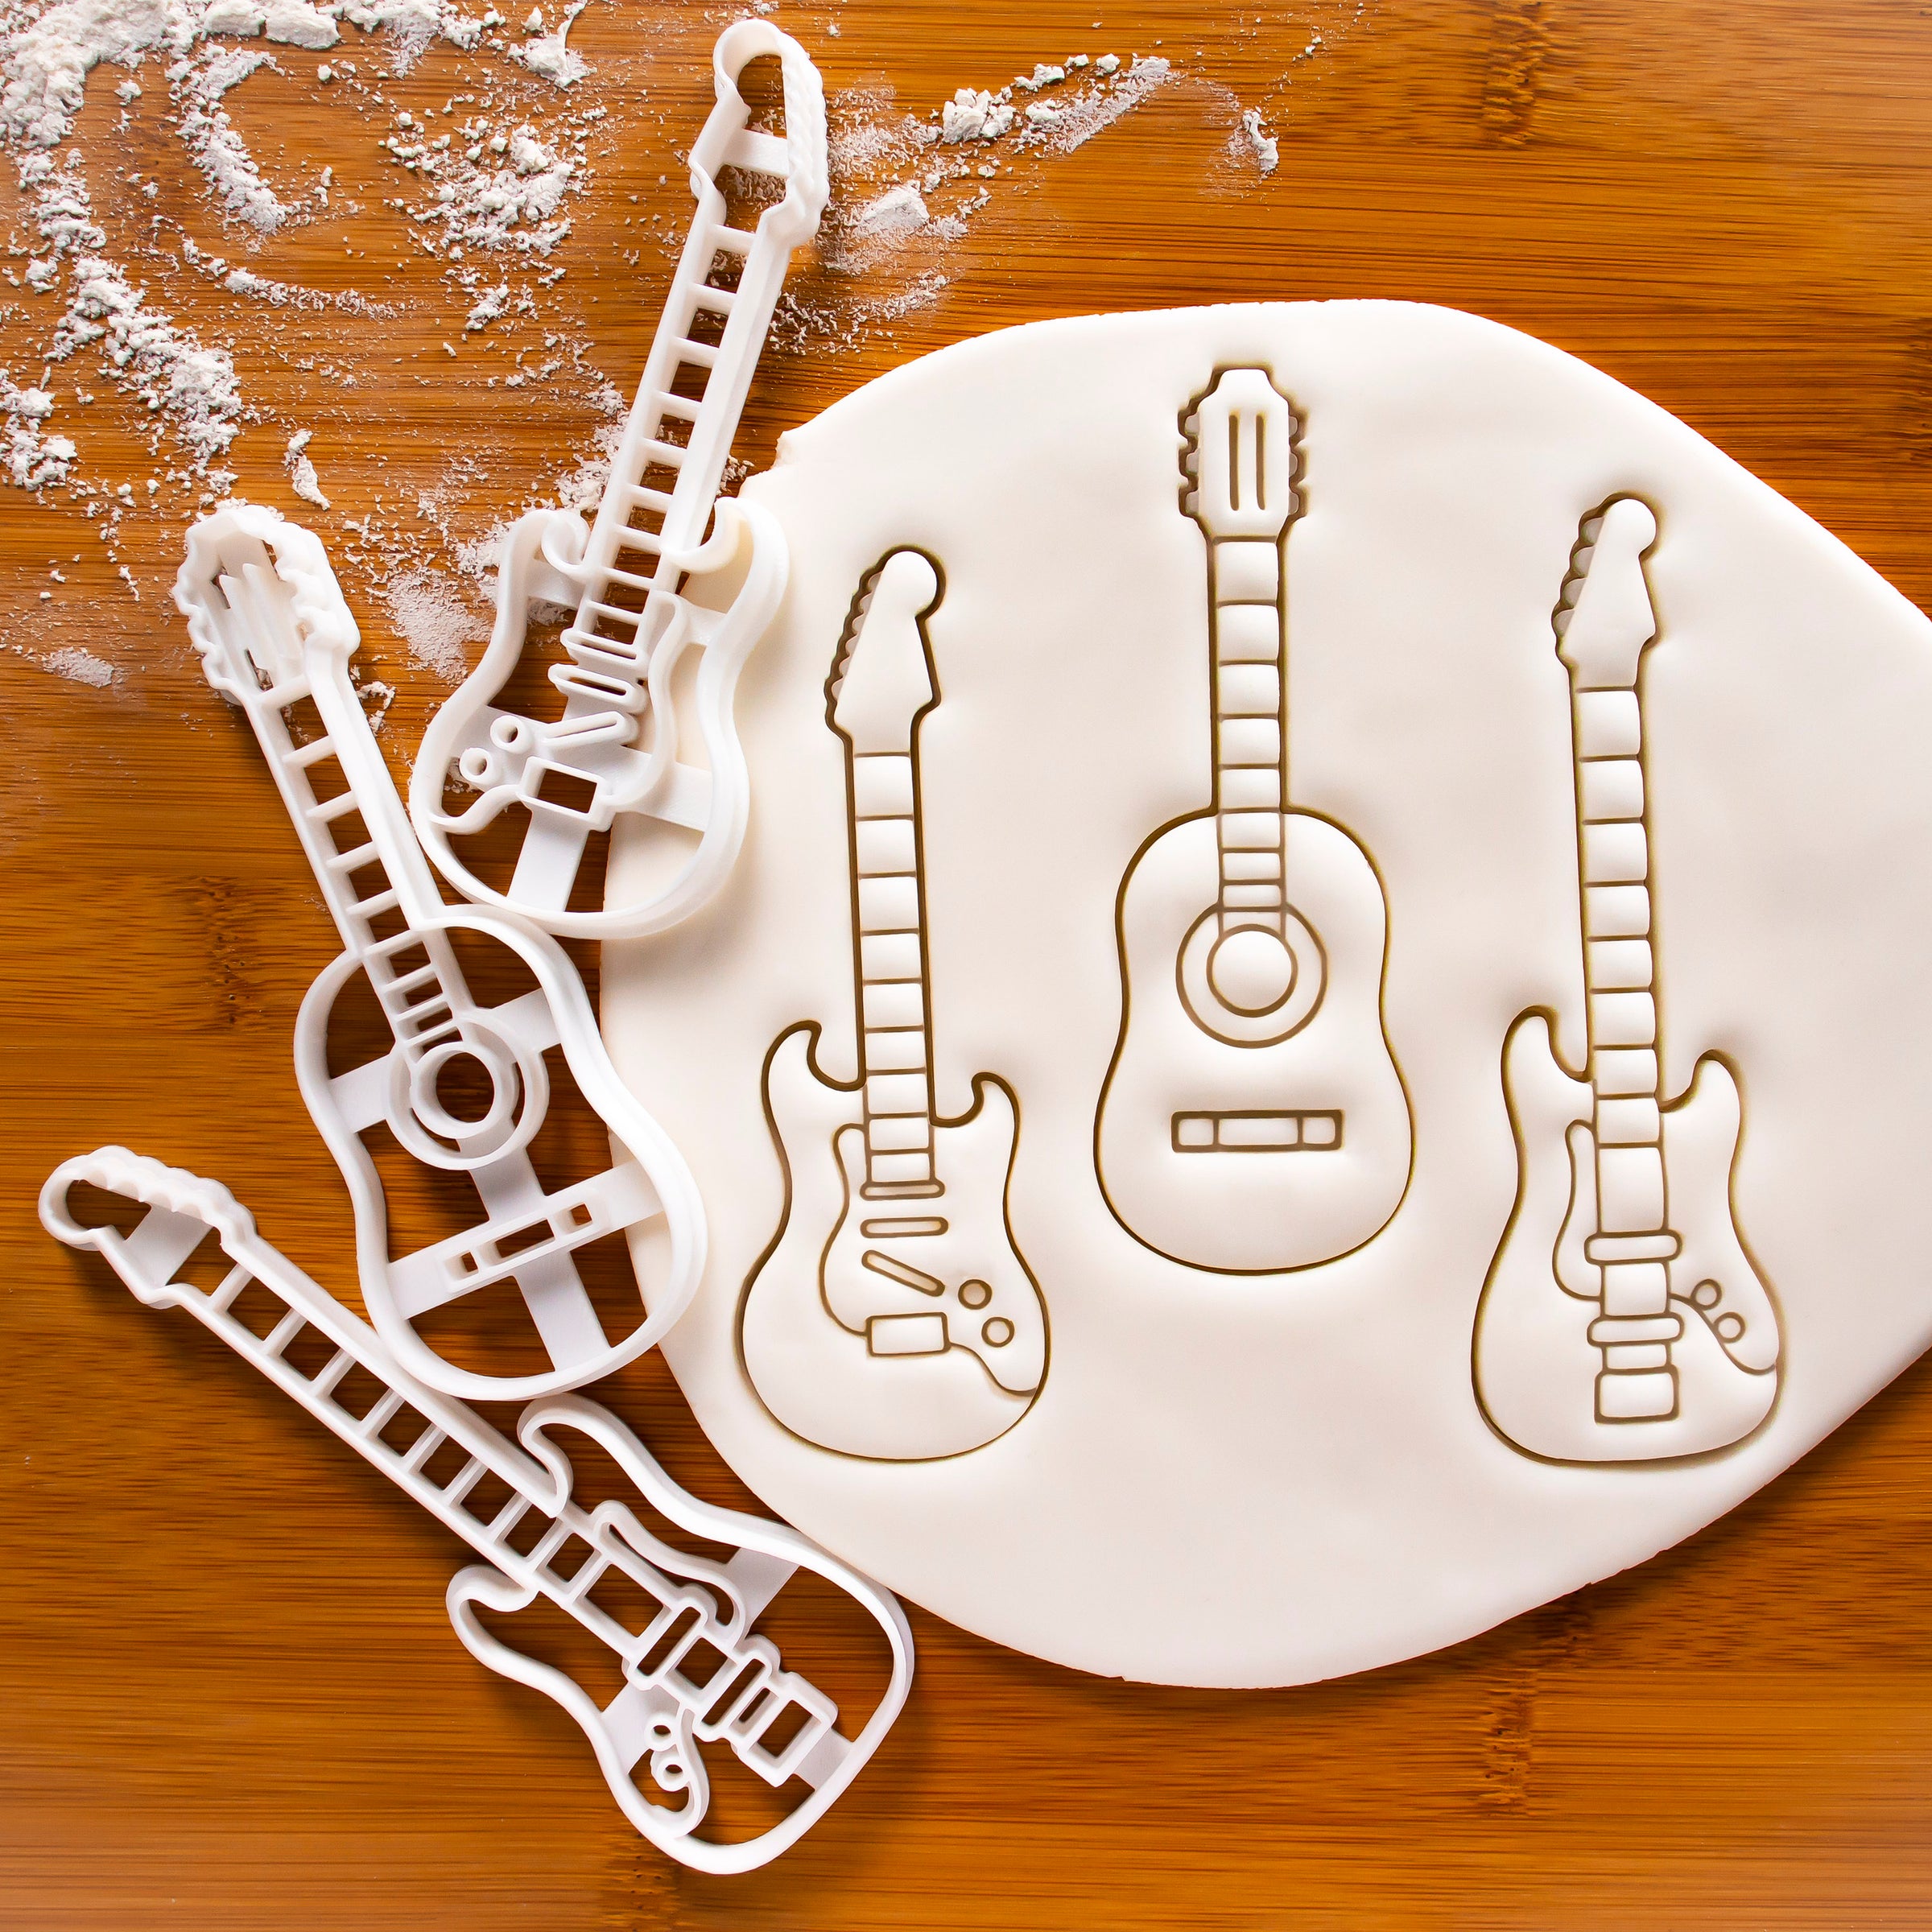 Set of 3 Guitar Cookie Cutters - Acoustic, Electric and Electric Bass Guitars